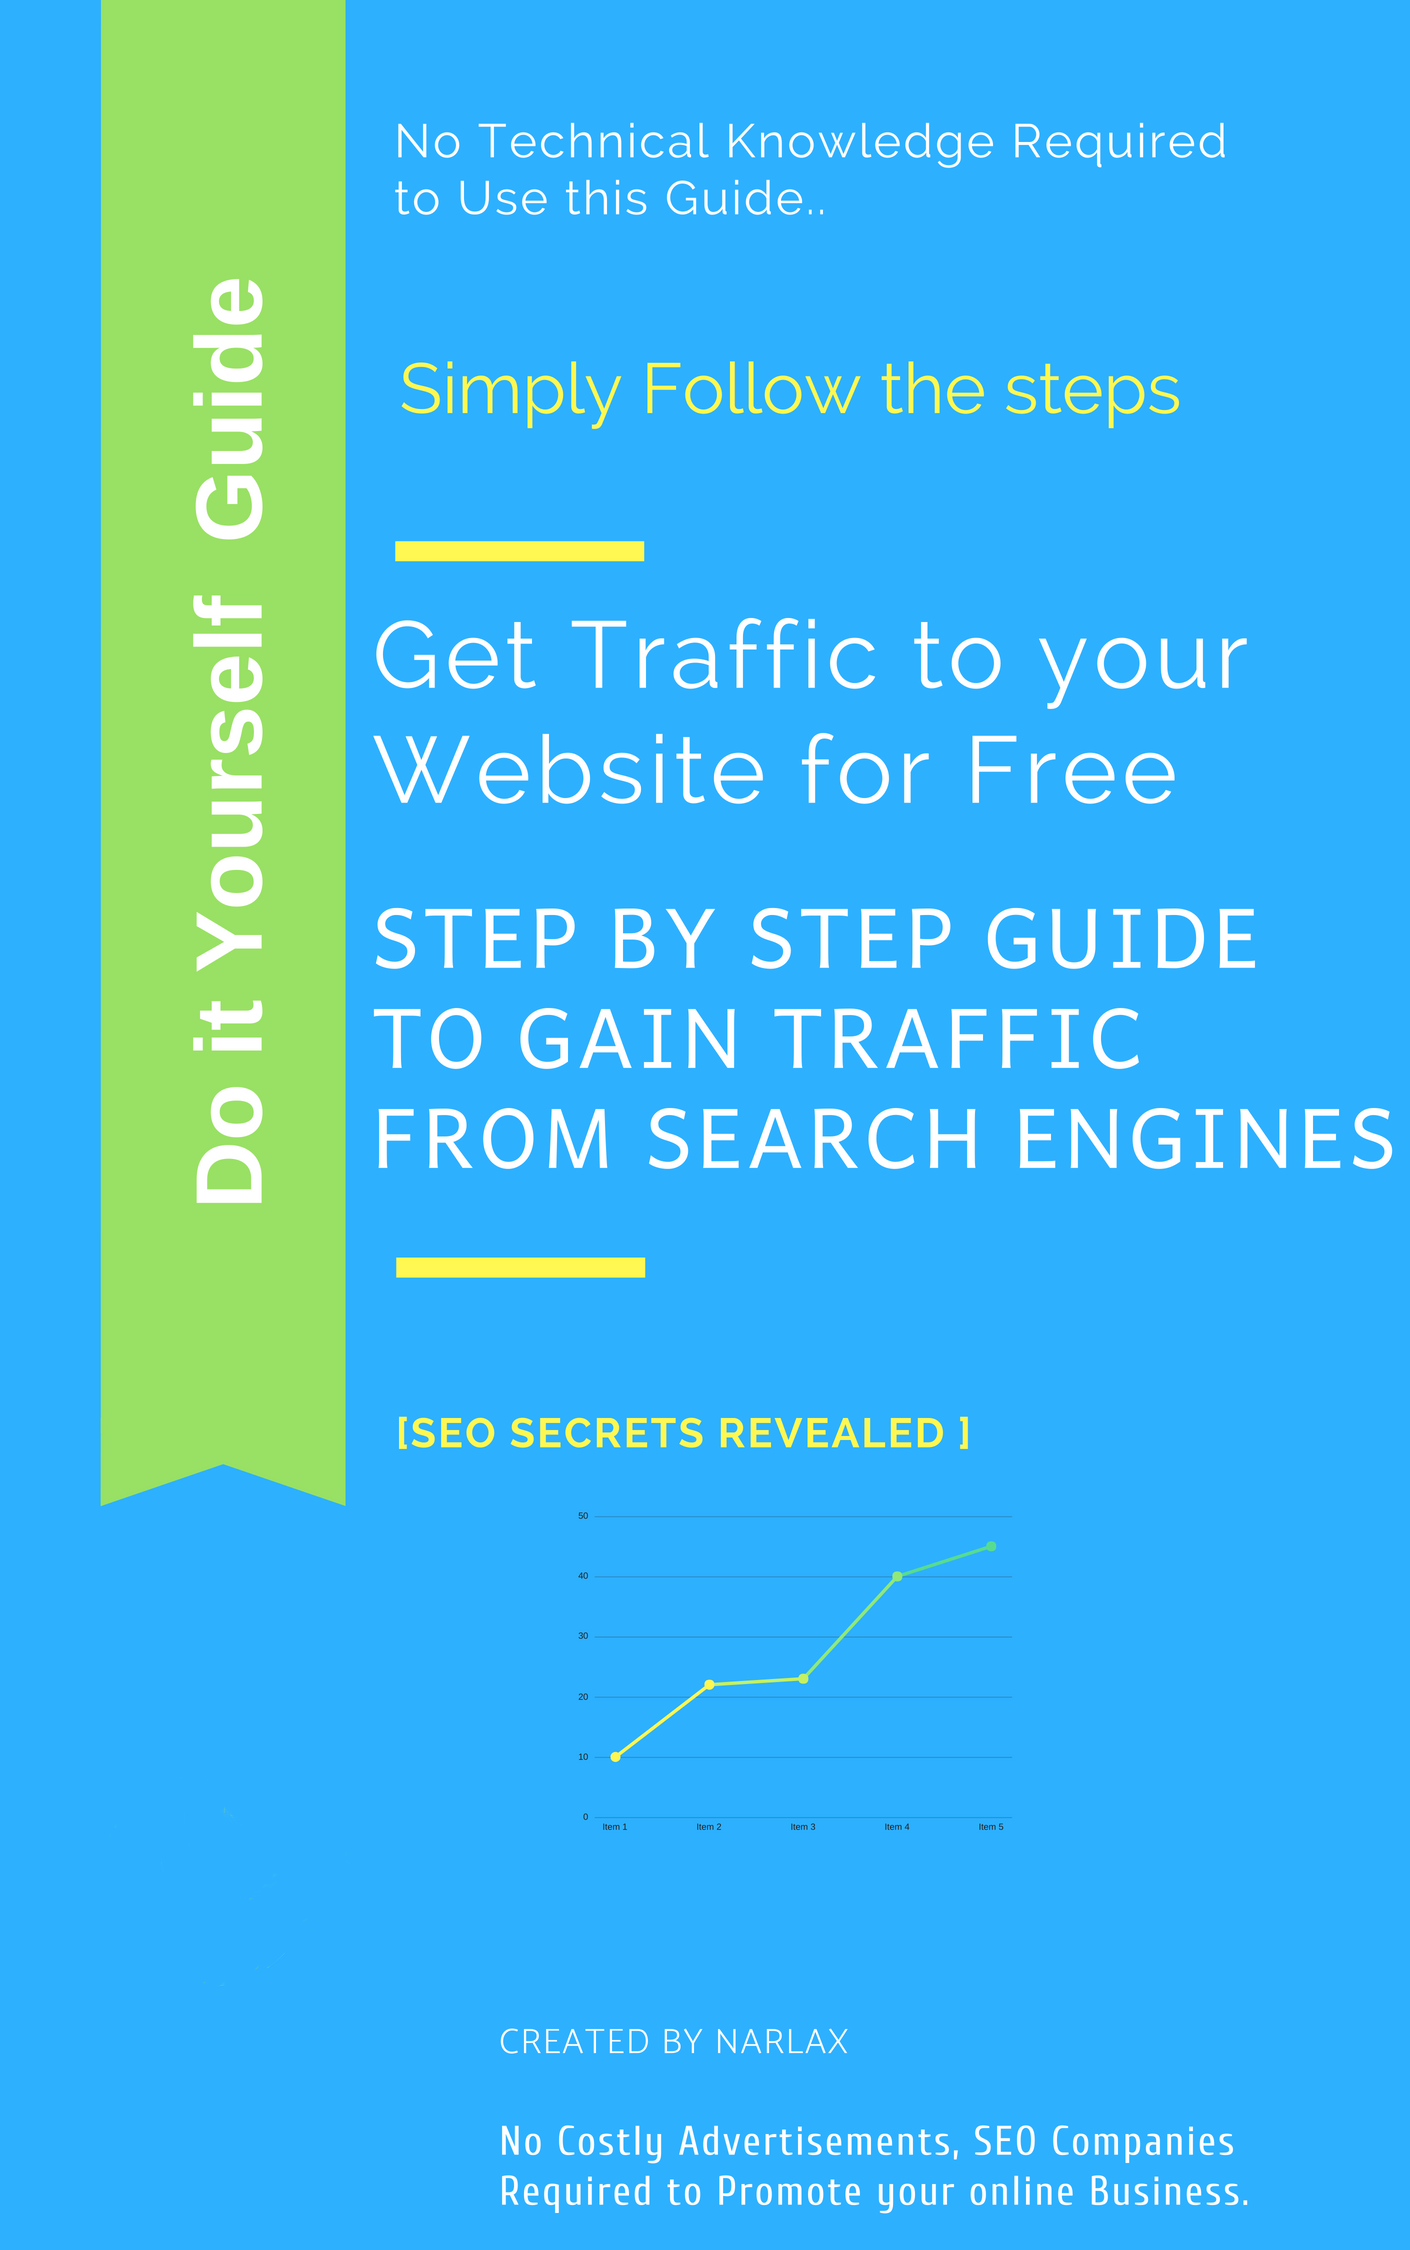 Step by step Guide to promote your website for free